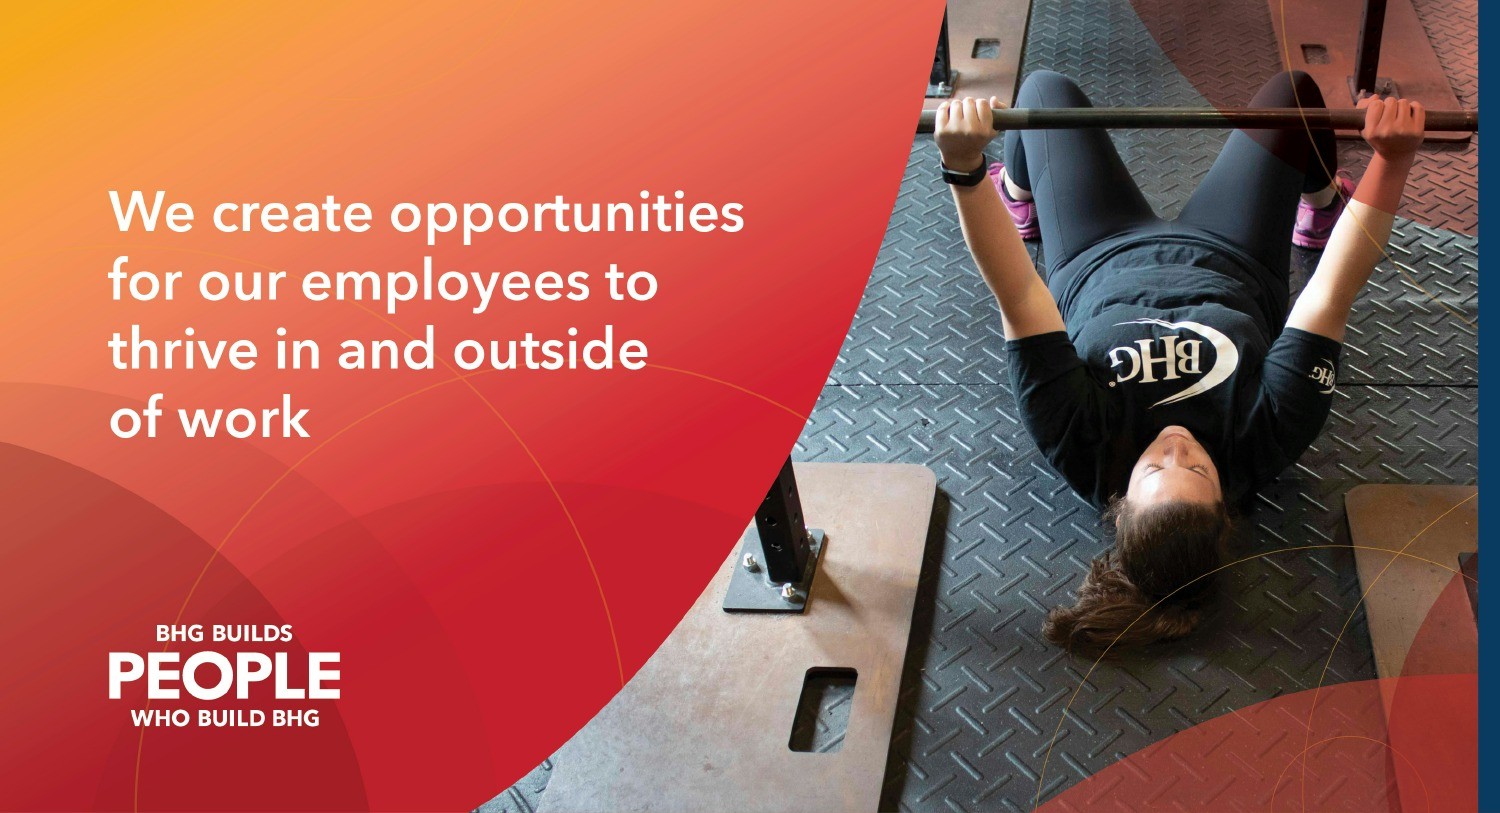 We create opportunities for our employees to thrive in and outside of work.